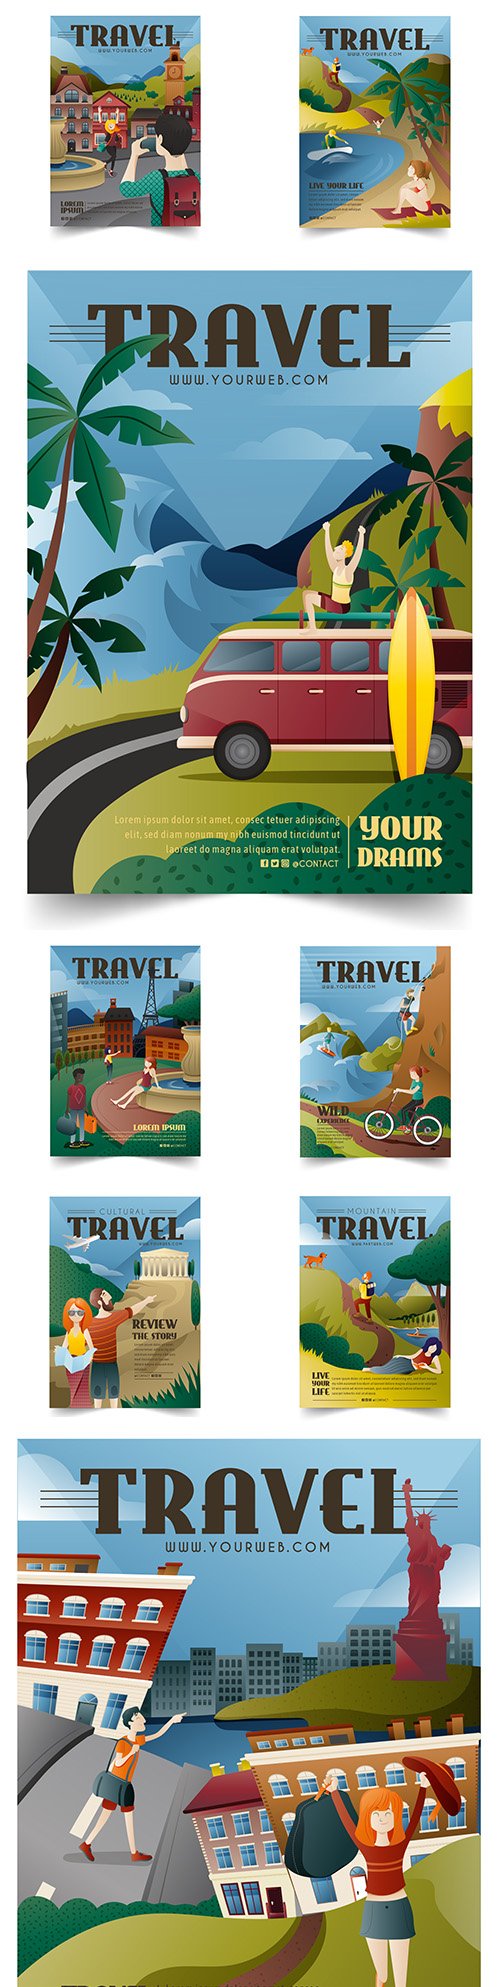 Illustrated poster for lovers travel different attractions